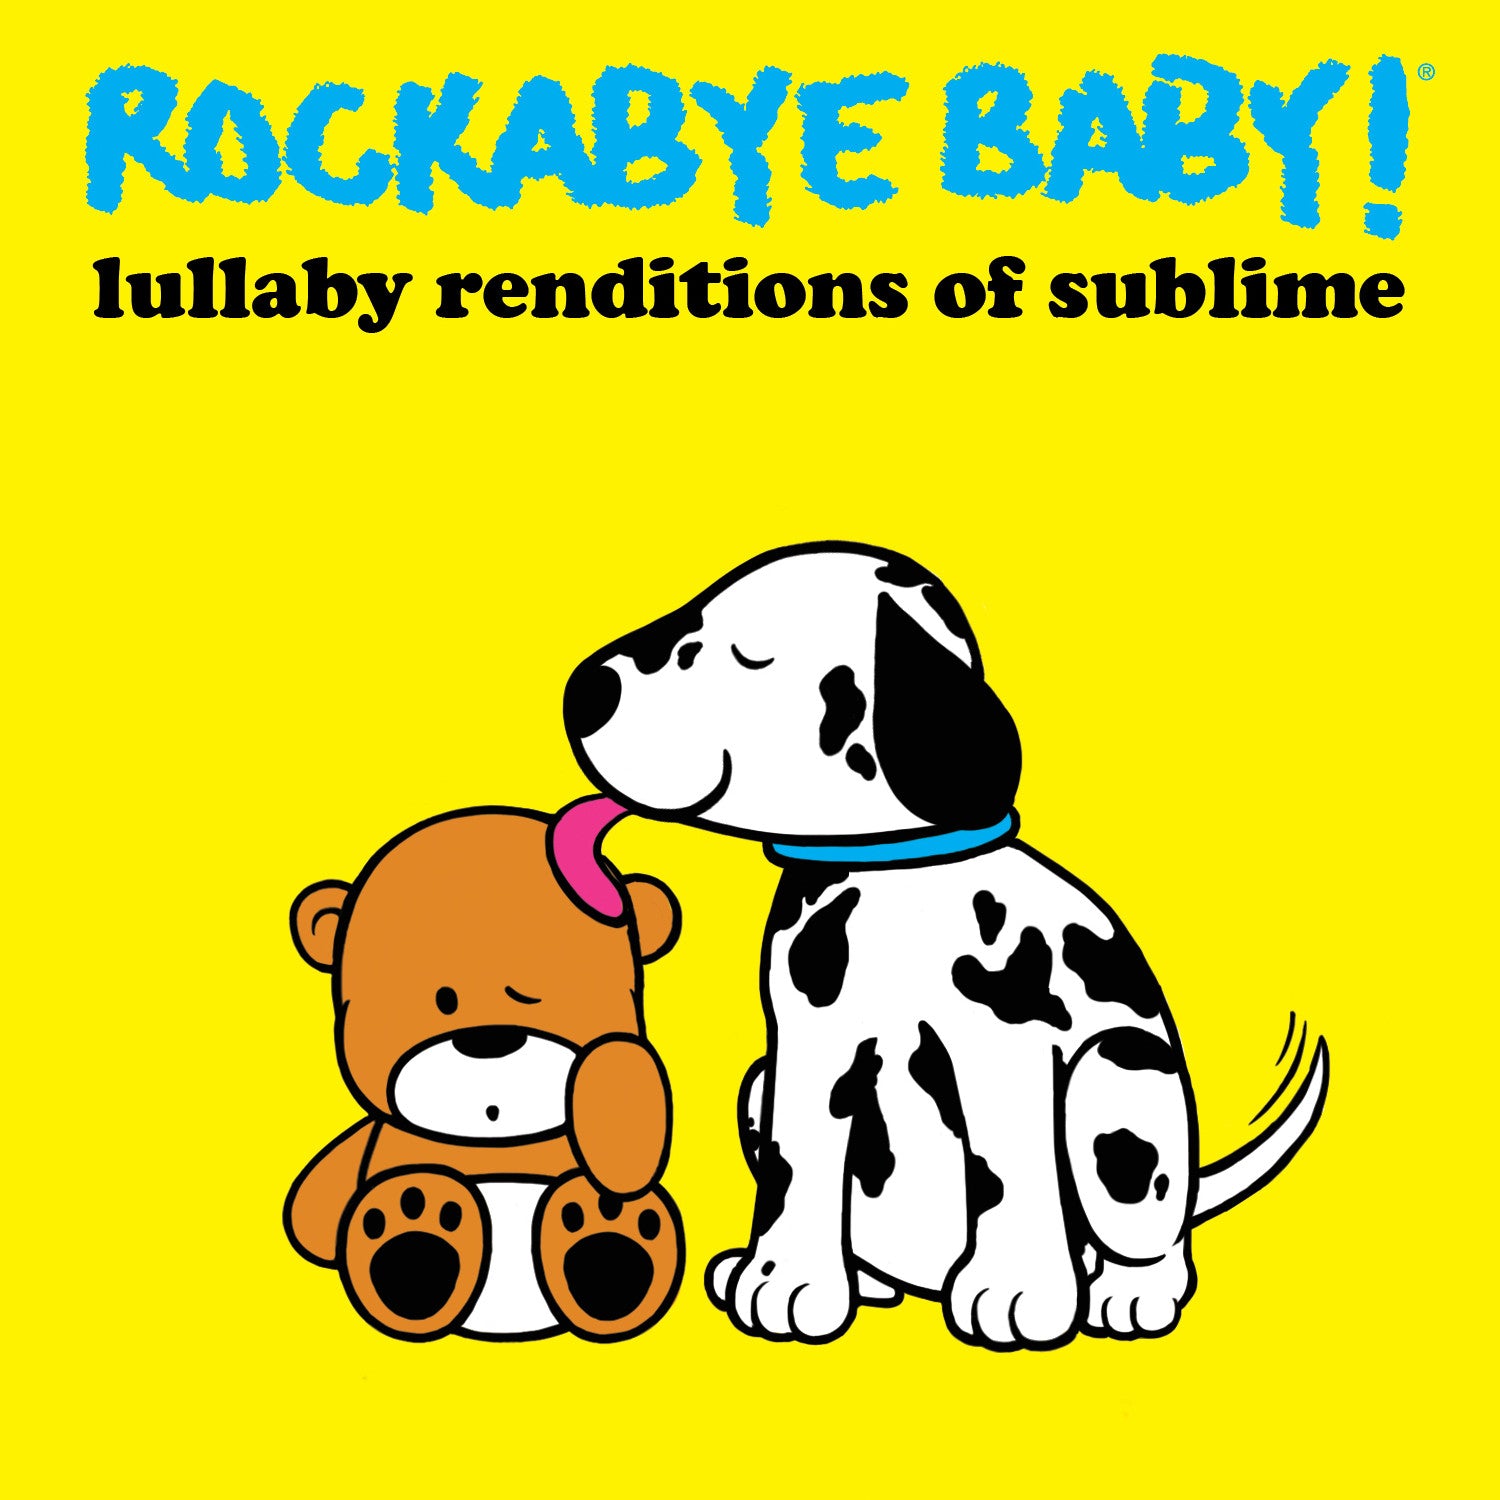 rockabye baby lullaby renditions sublime